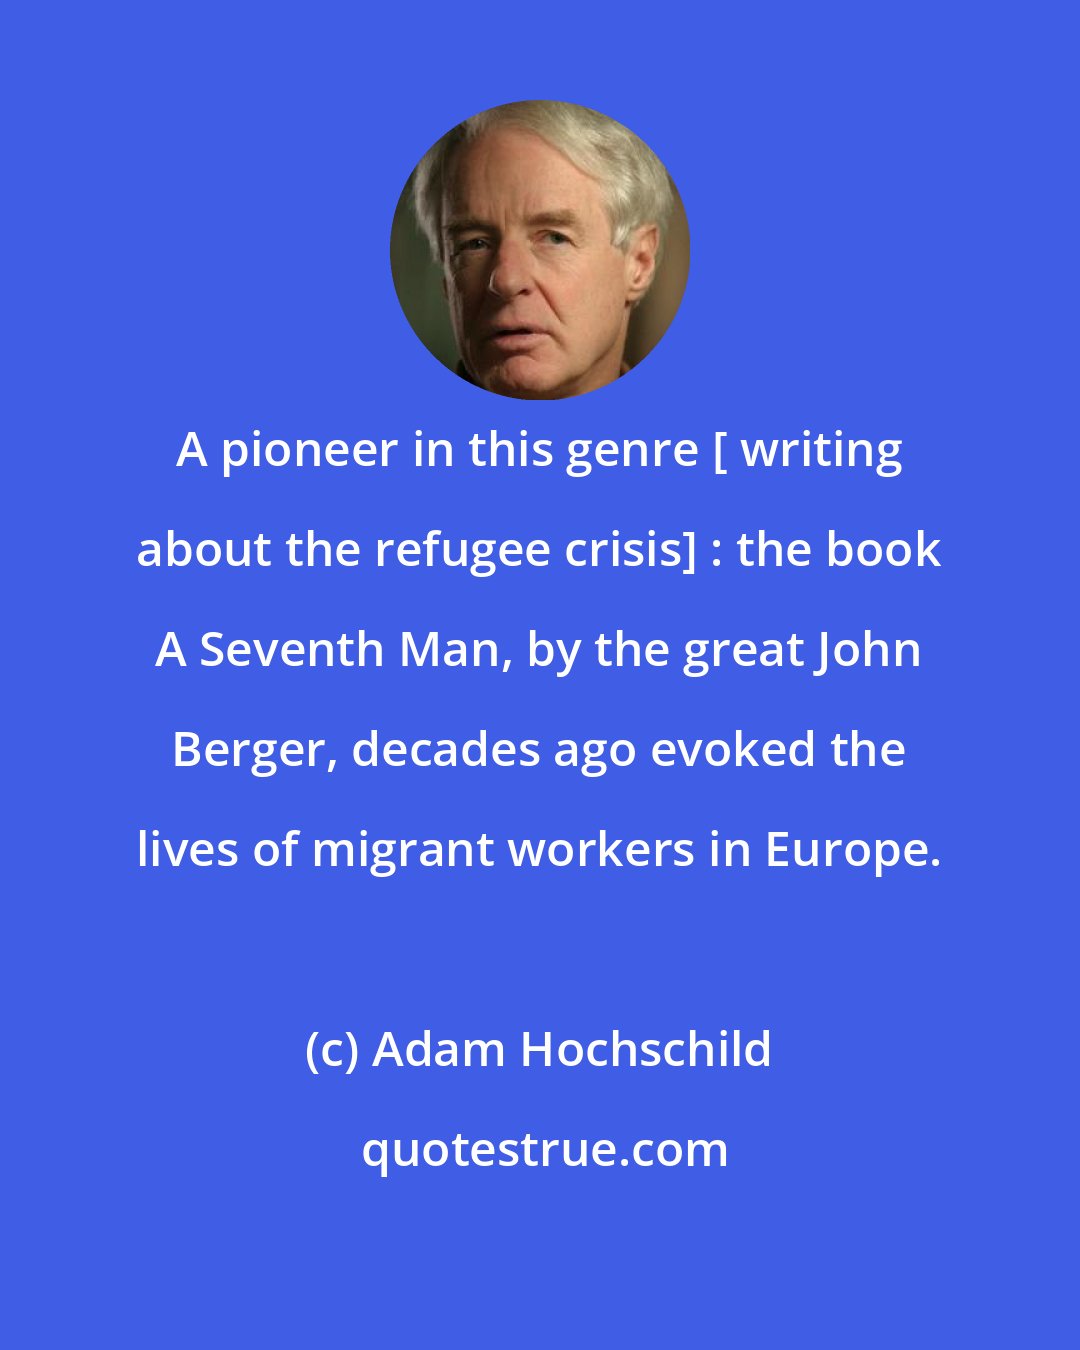 Adam Hochschild: A pioneer in this genre [ writing about the refugee crisis] : the book A Seventh Man, by the great John Berger, decades ago evoked the lives of migrant workers in Europe.